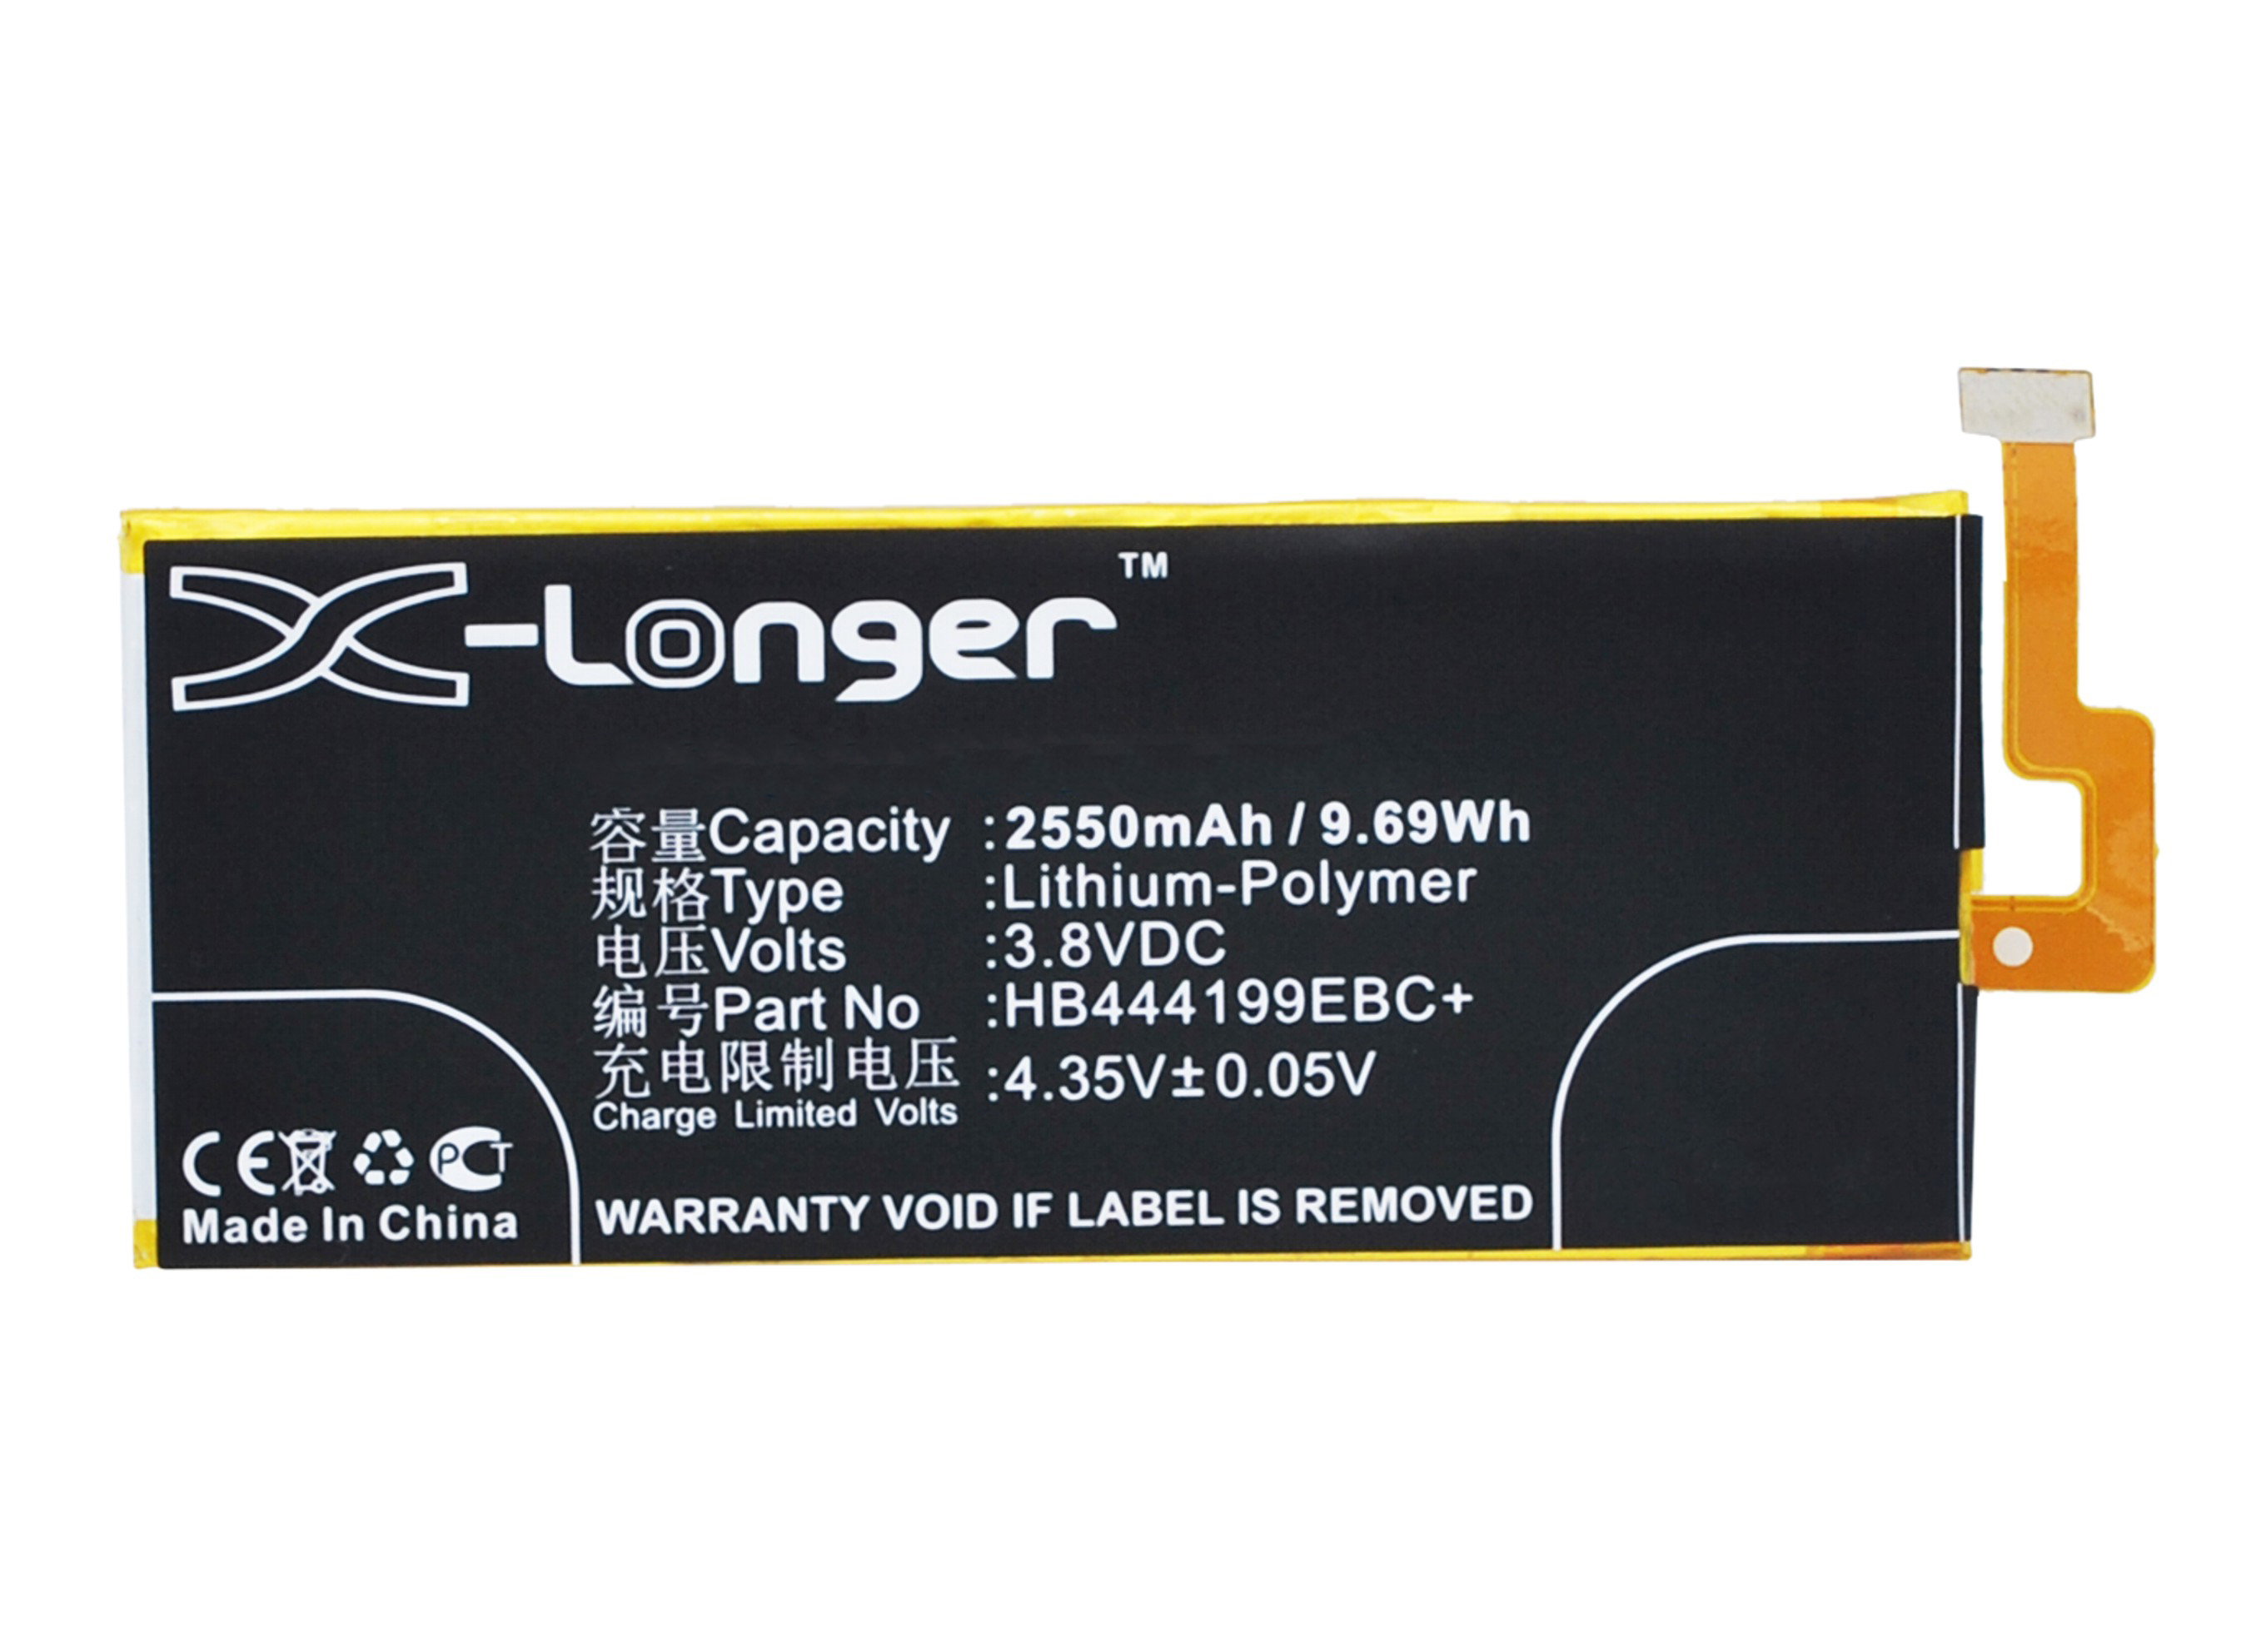 Synergy Digital Battery Compatible With Huawei HB444199EBC+ Cellphone Battery - (Li-Pol, 3.8V, 2550 mAh / 9.69Wh)